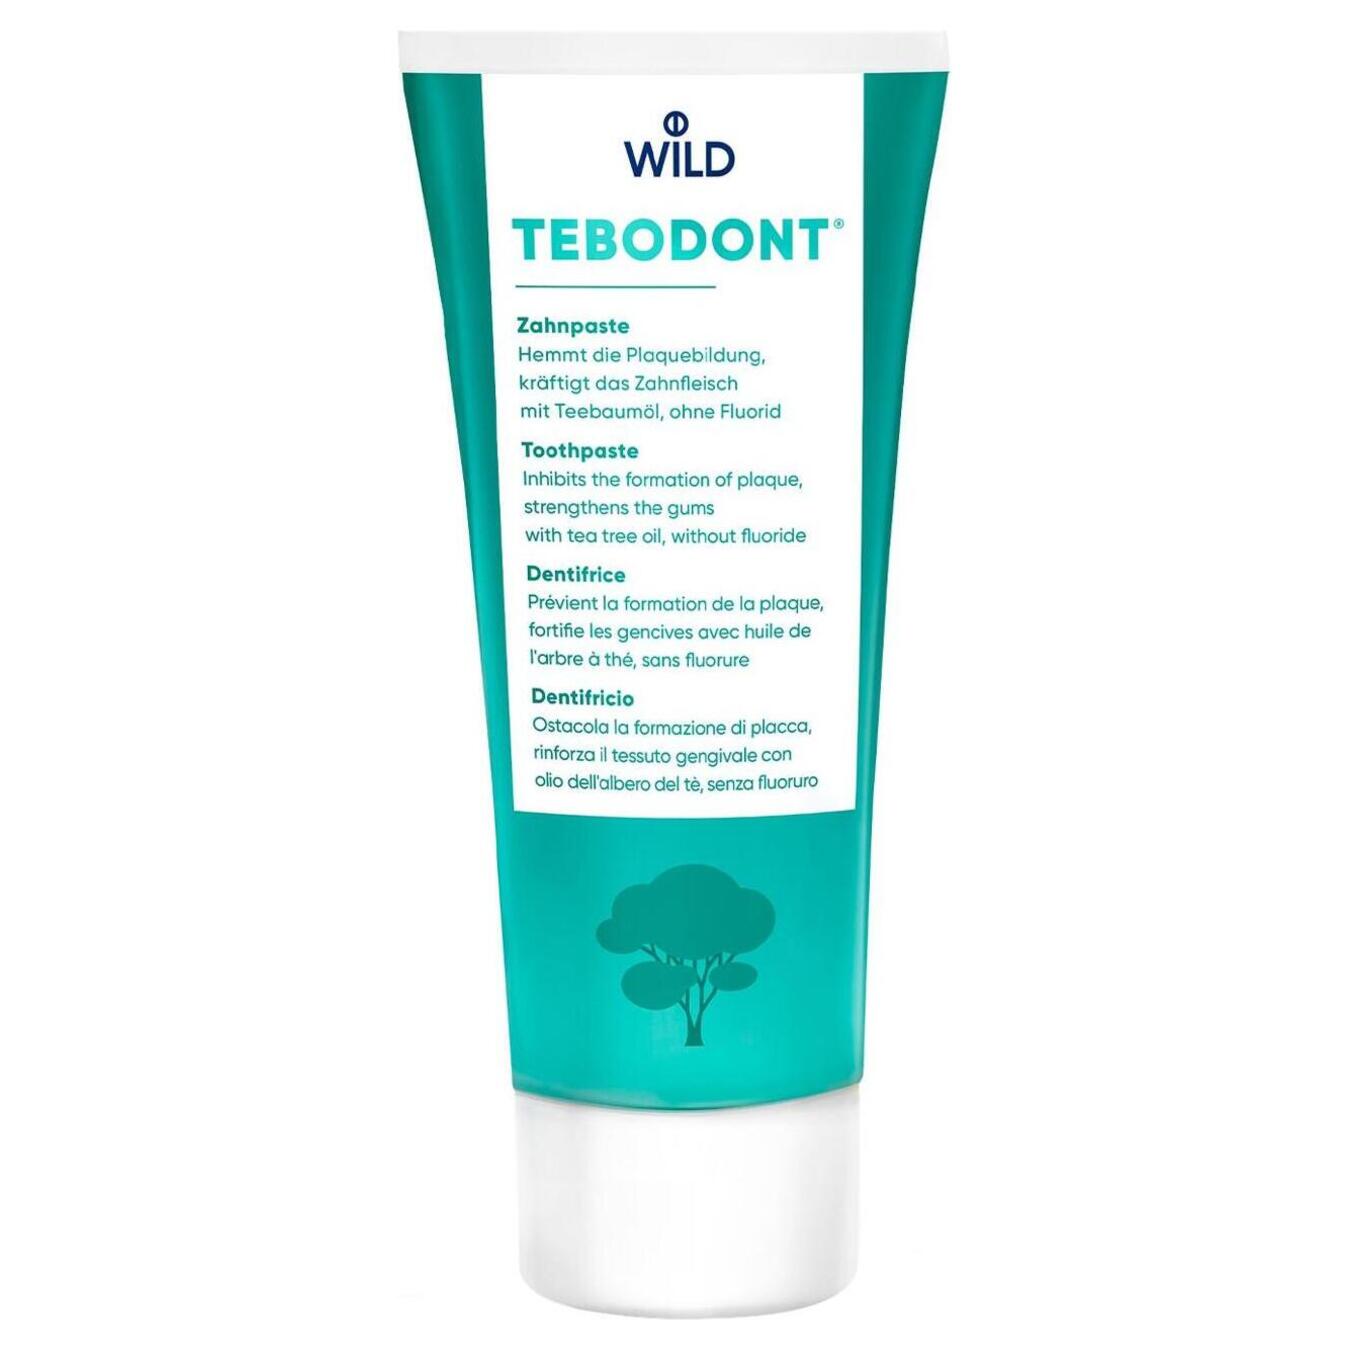 Tebodont toothpaste with tea tree oil (0.75%) without fluoride